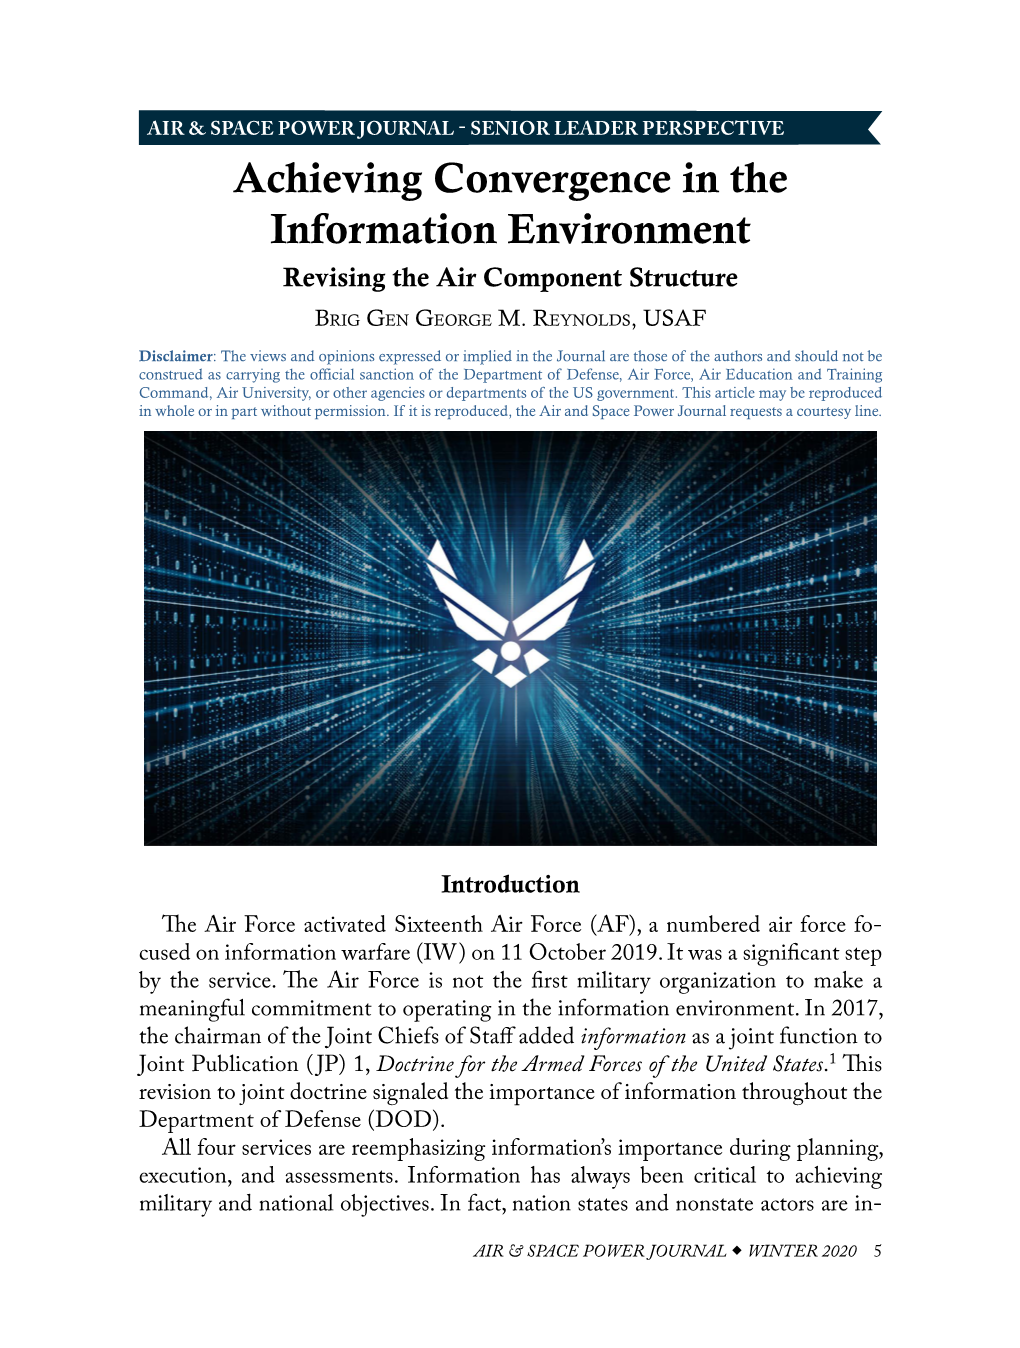 Achieving Convergence in the Information Environment Revising the Air Component Structure